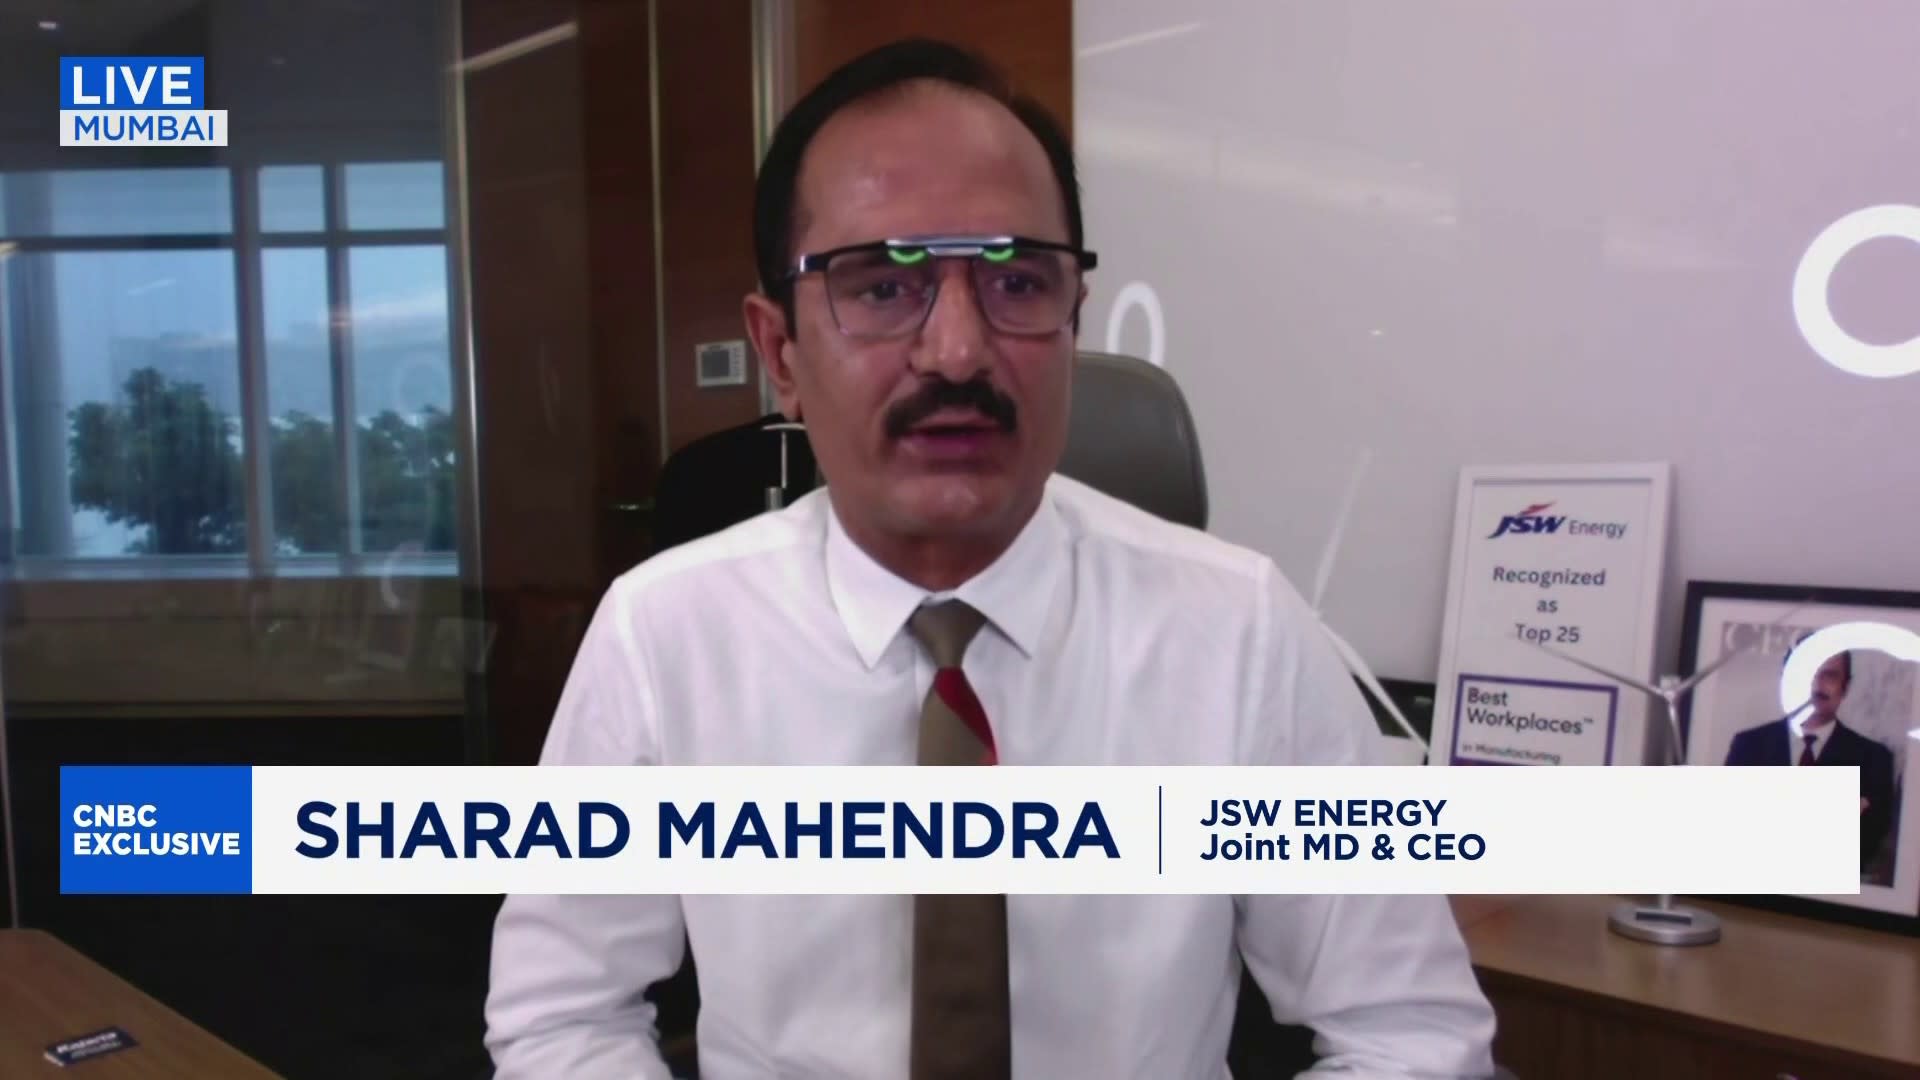 India transition toward clean energy is the ‘major focus’: JSW Energy [Video]